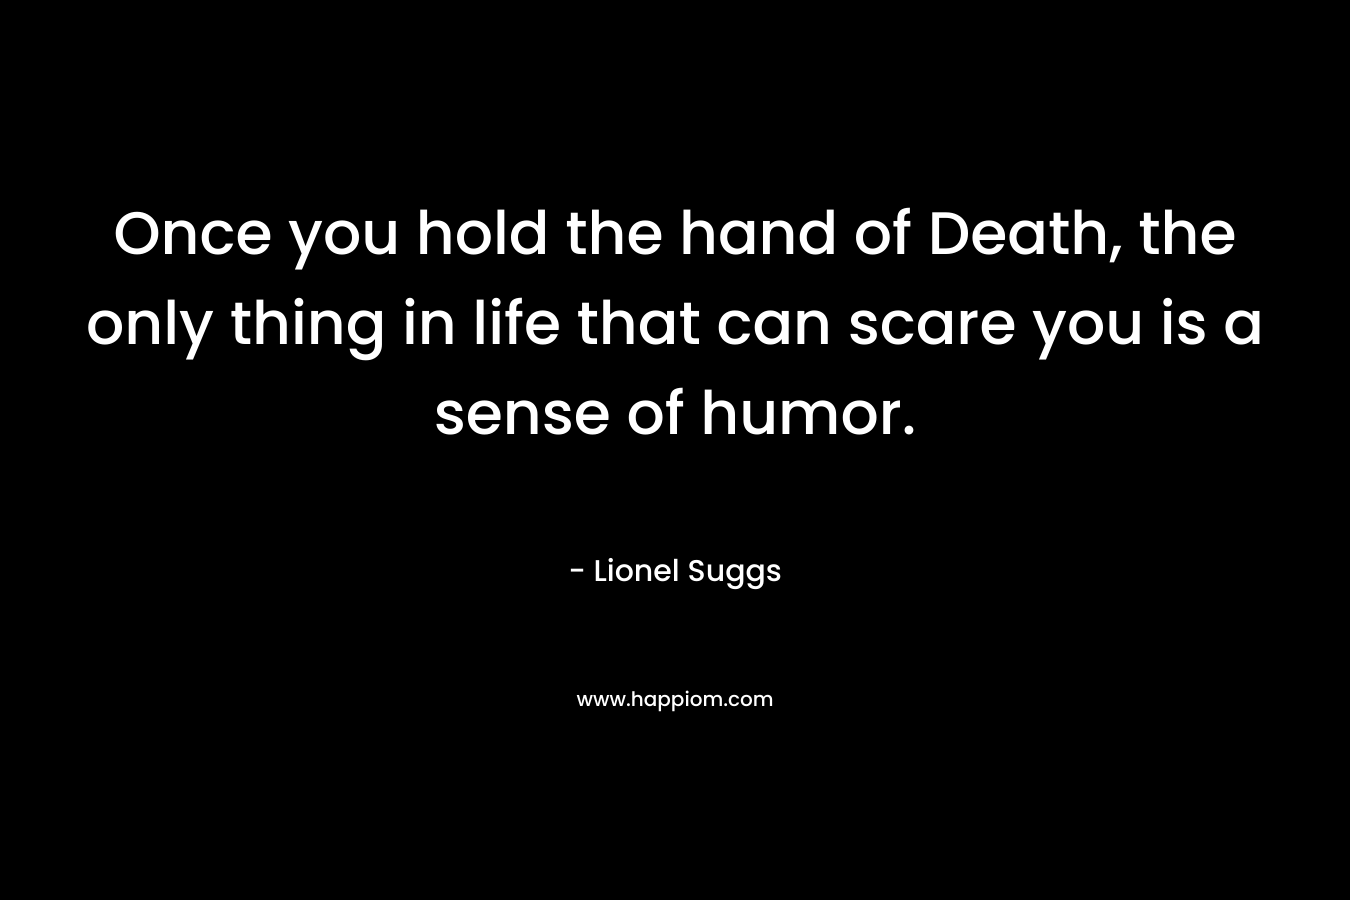 Once you hold the hand of Death, the only thing in life that can scare you is a sense of humor. – Lionel Suggs